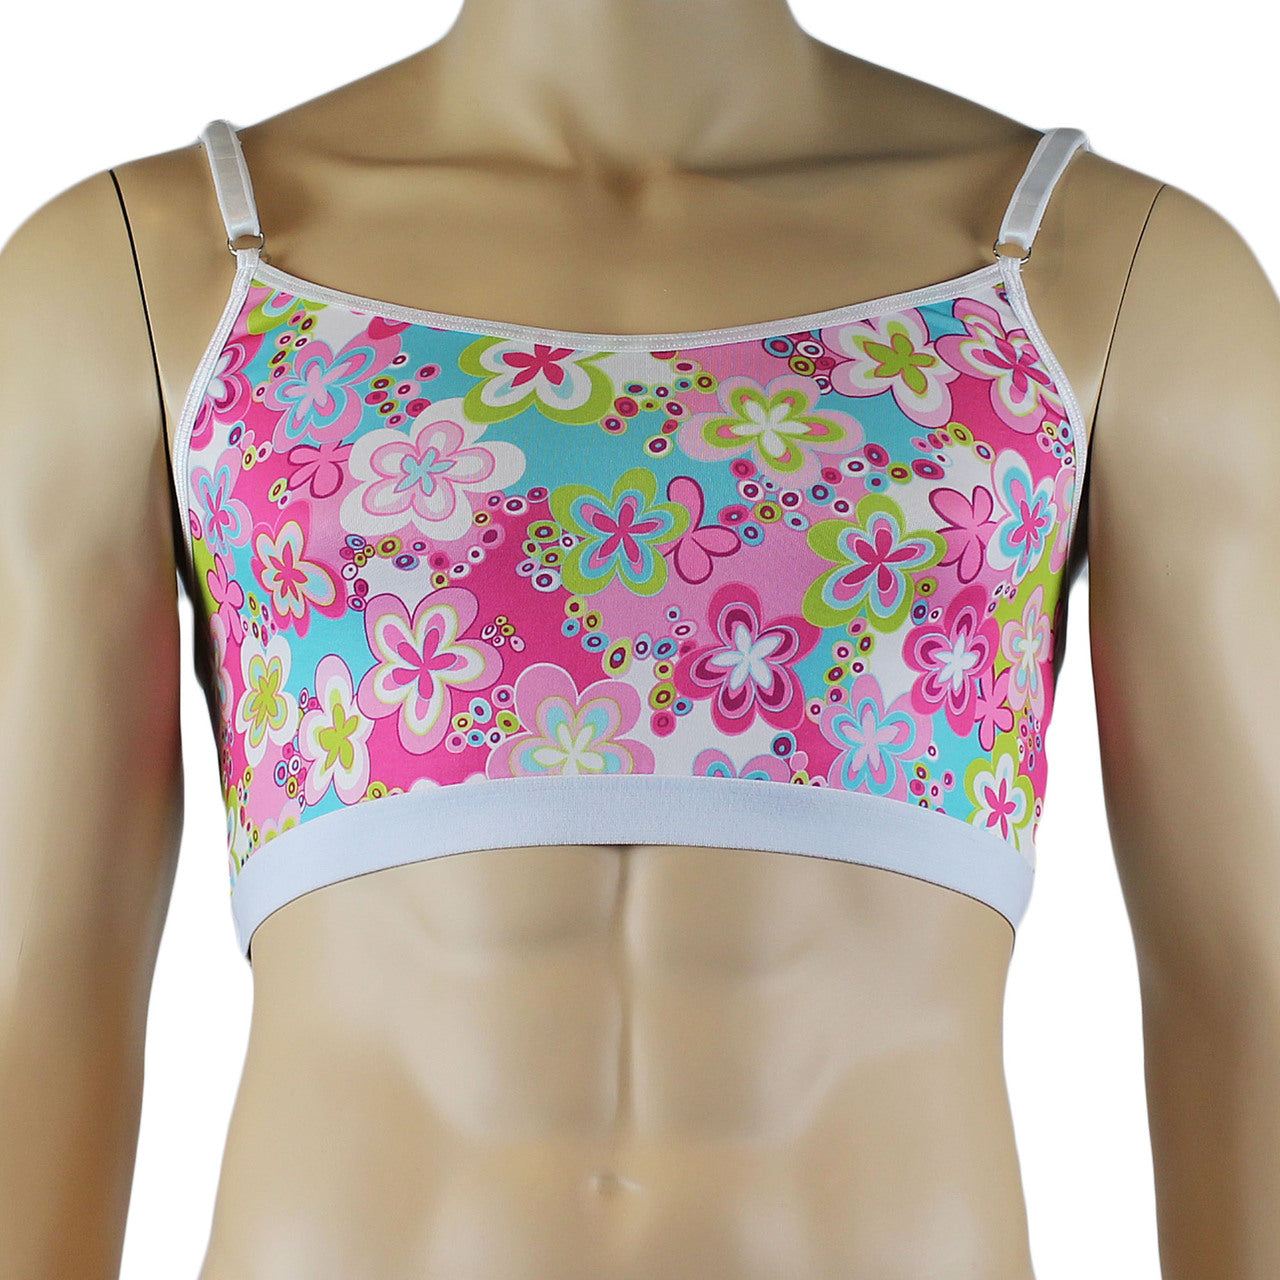 Male Hippie Flower Print Crop Top Camisole with Band